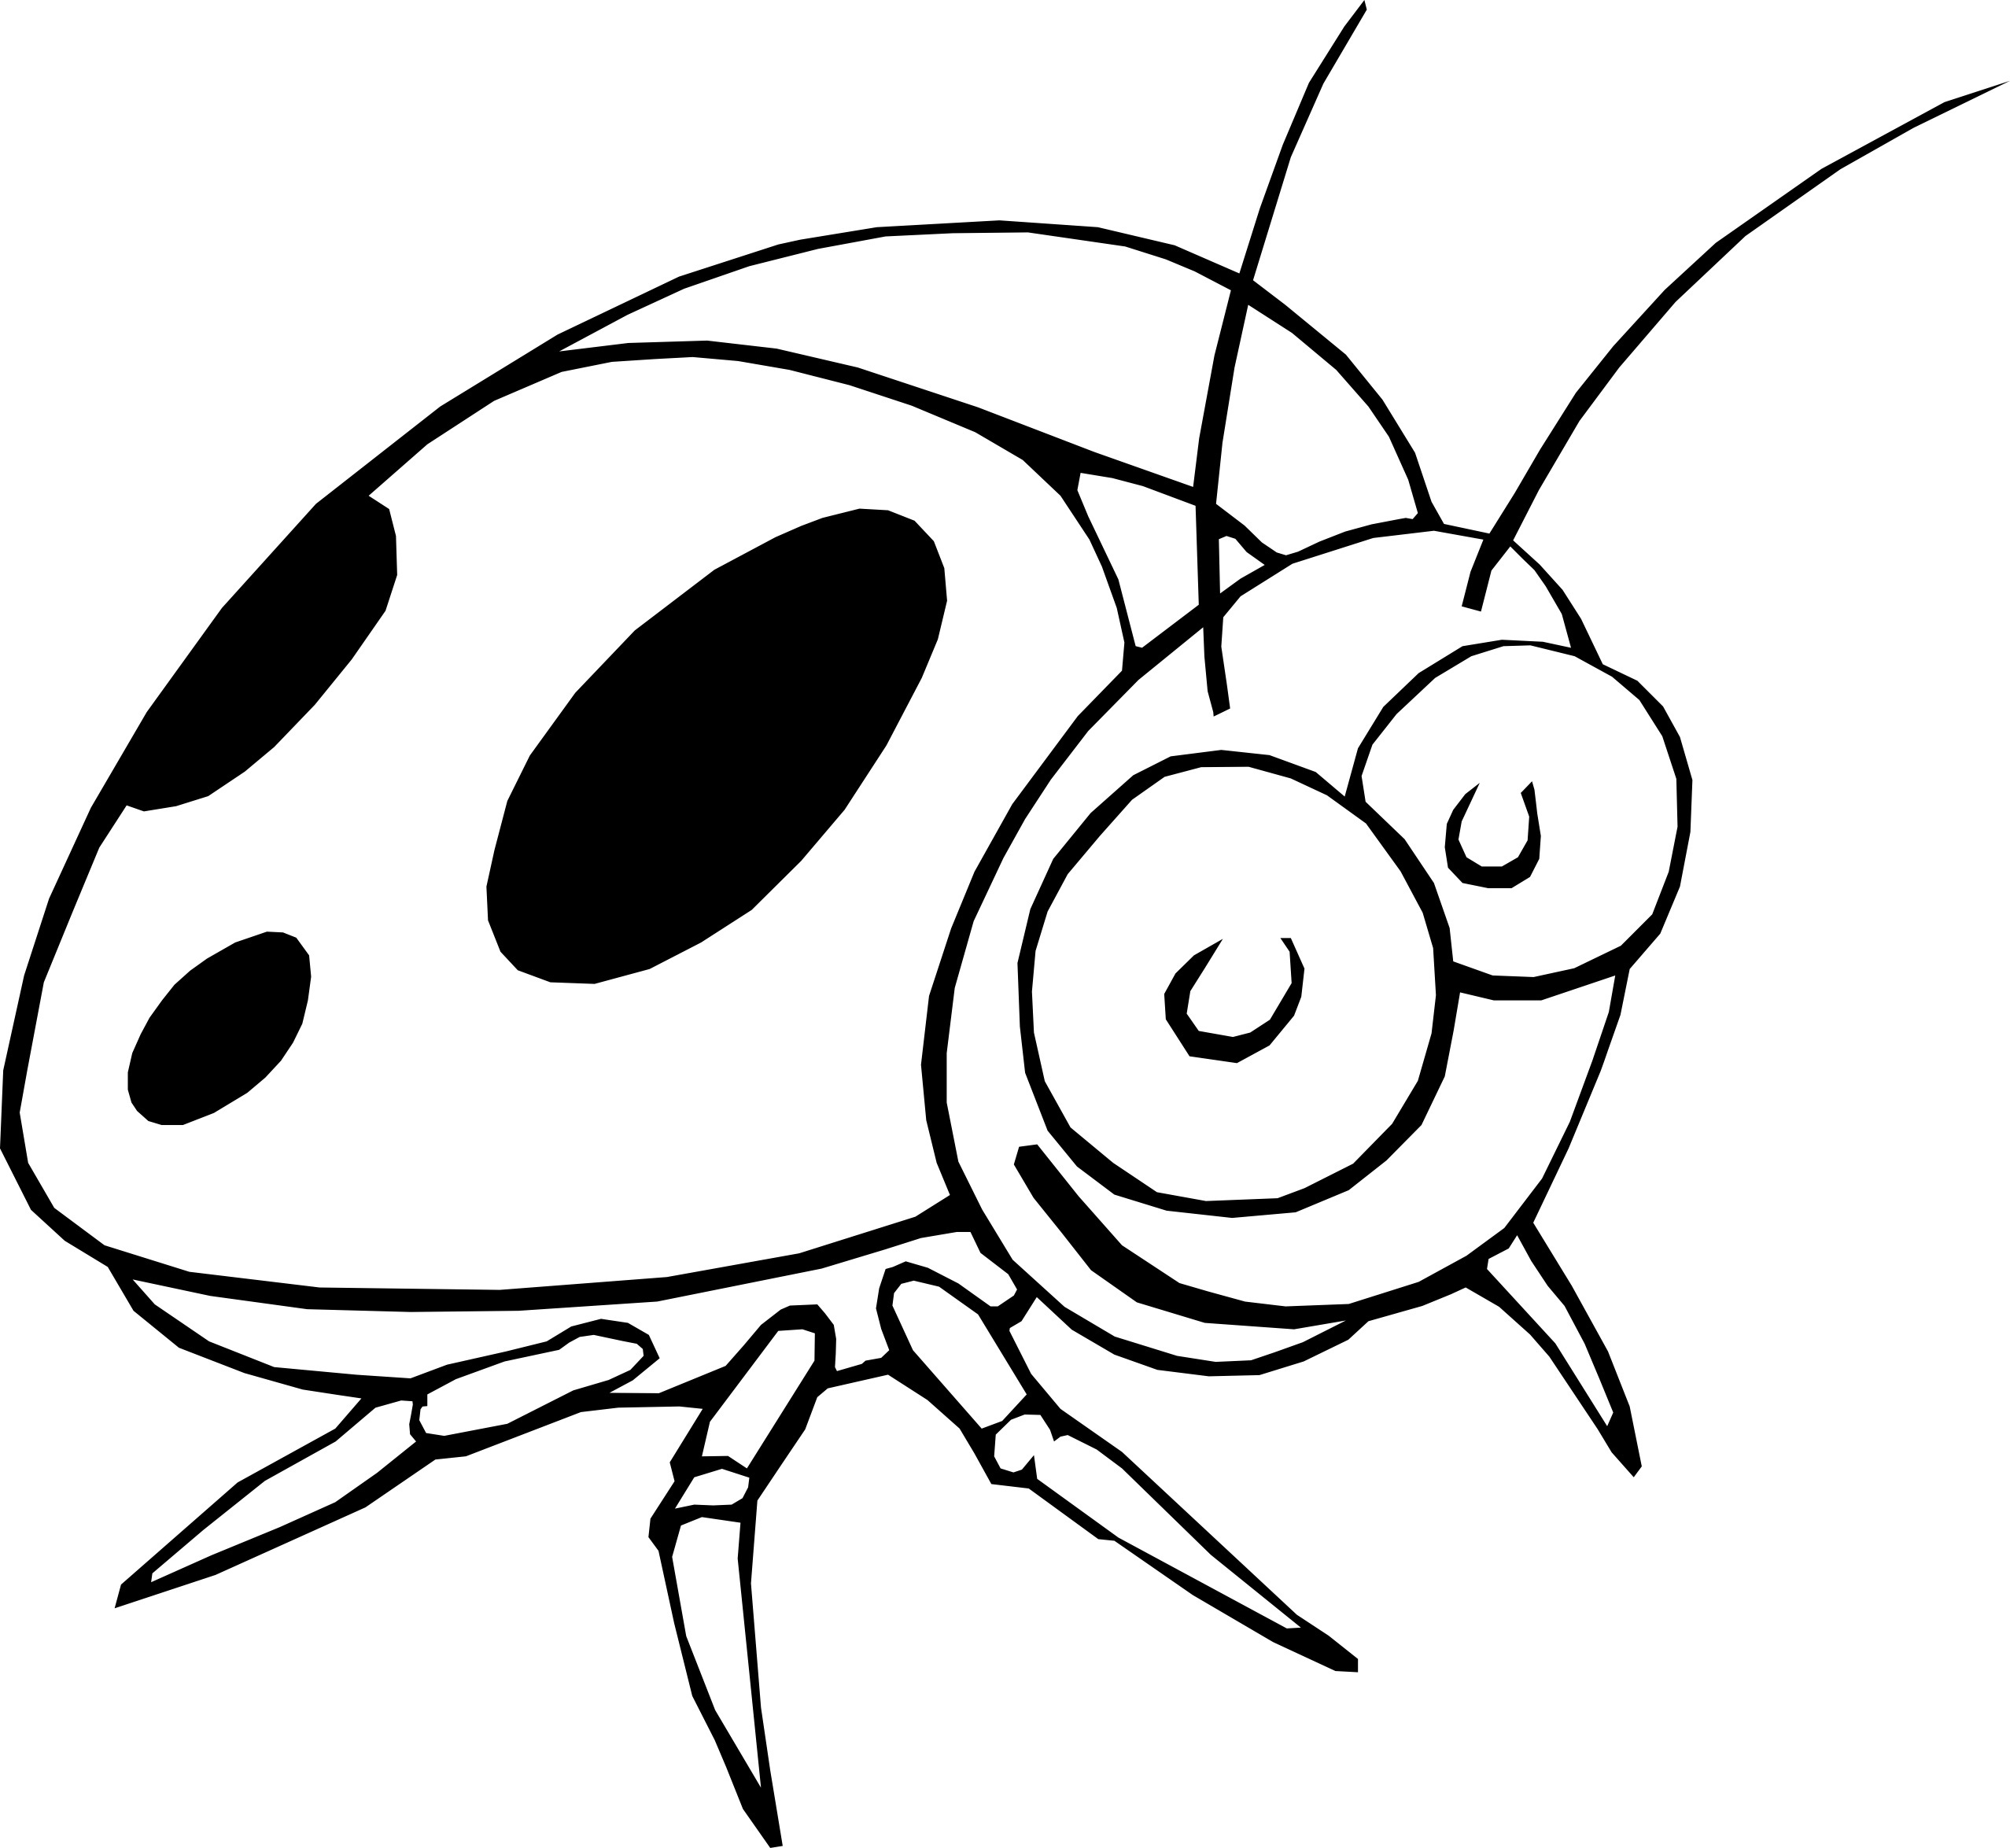 lady bug coloring book pages - photo #31